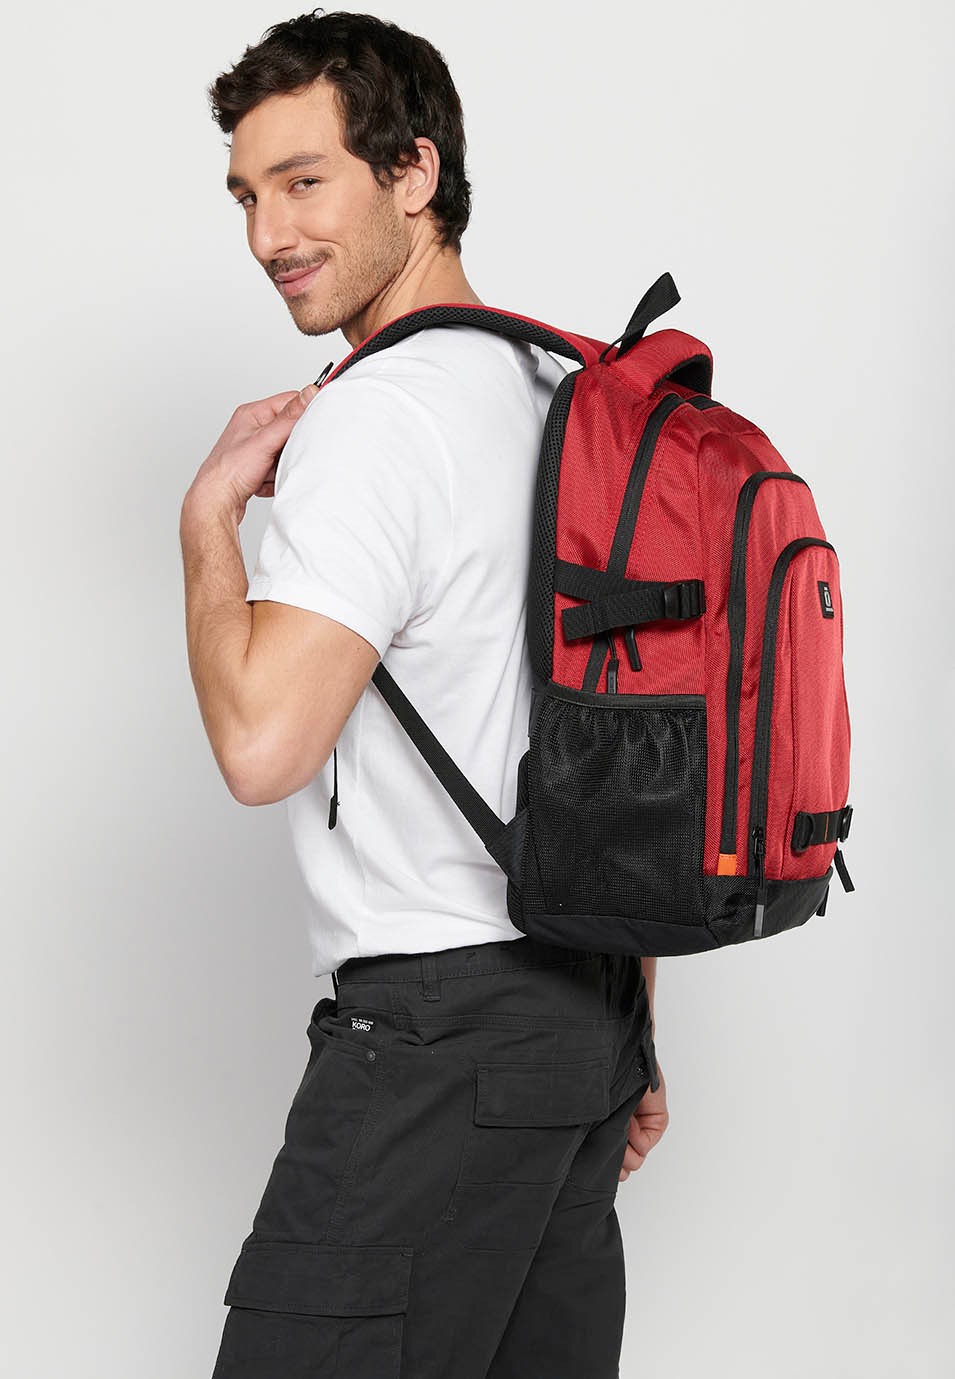 Koröshi backpack with three zippered compartments, one for laptop, with red interior pockets 7